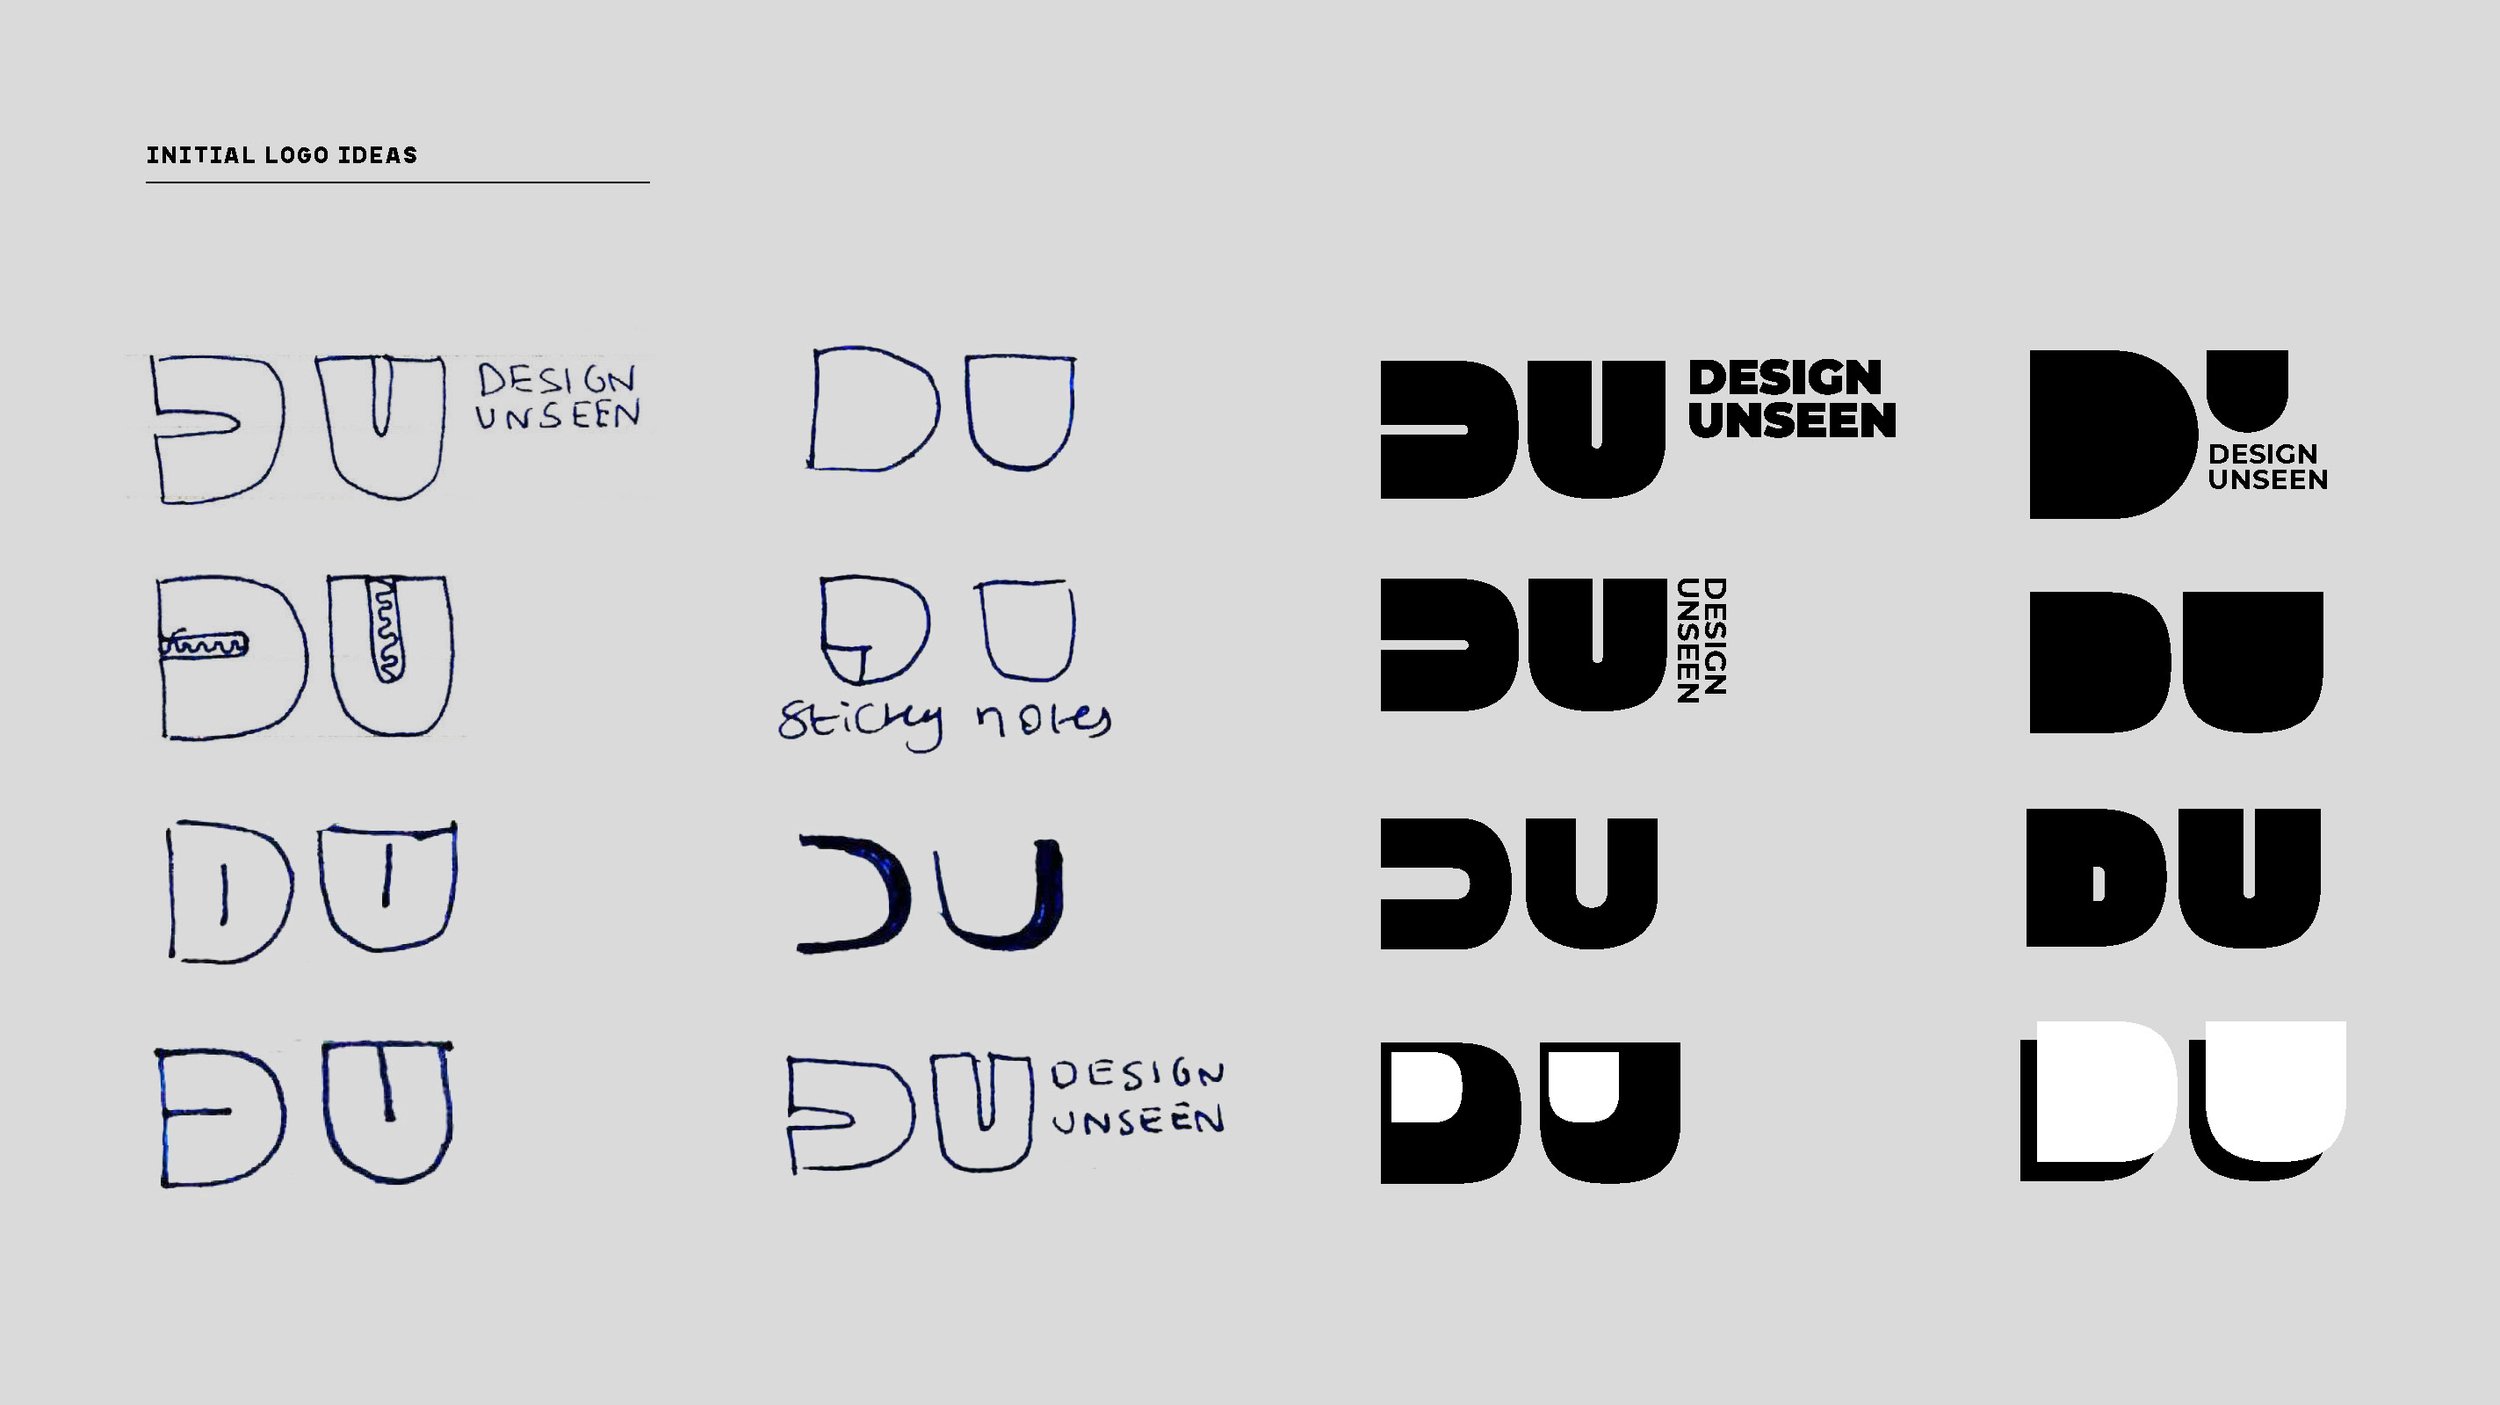 Design Unseen Research_Page_14.jpg